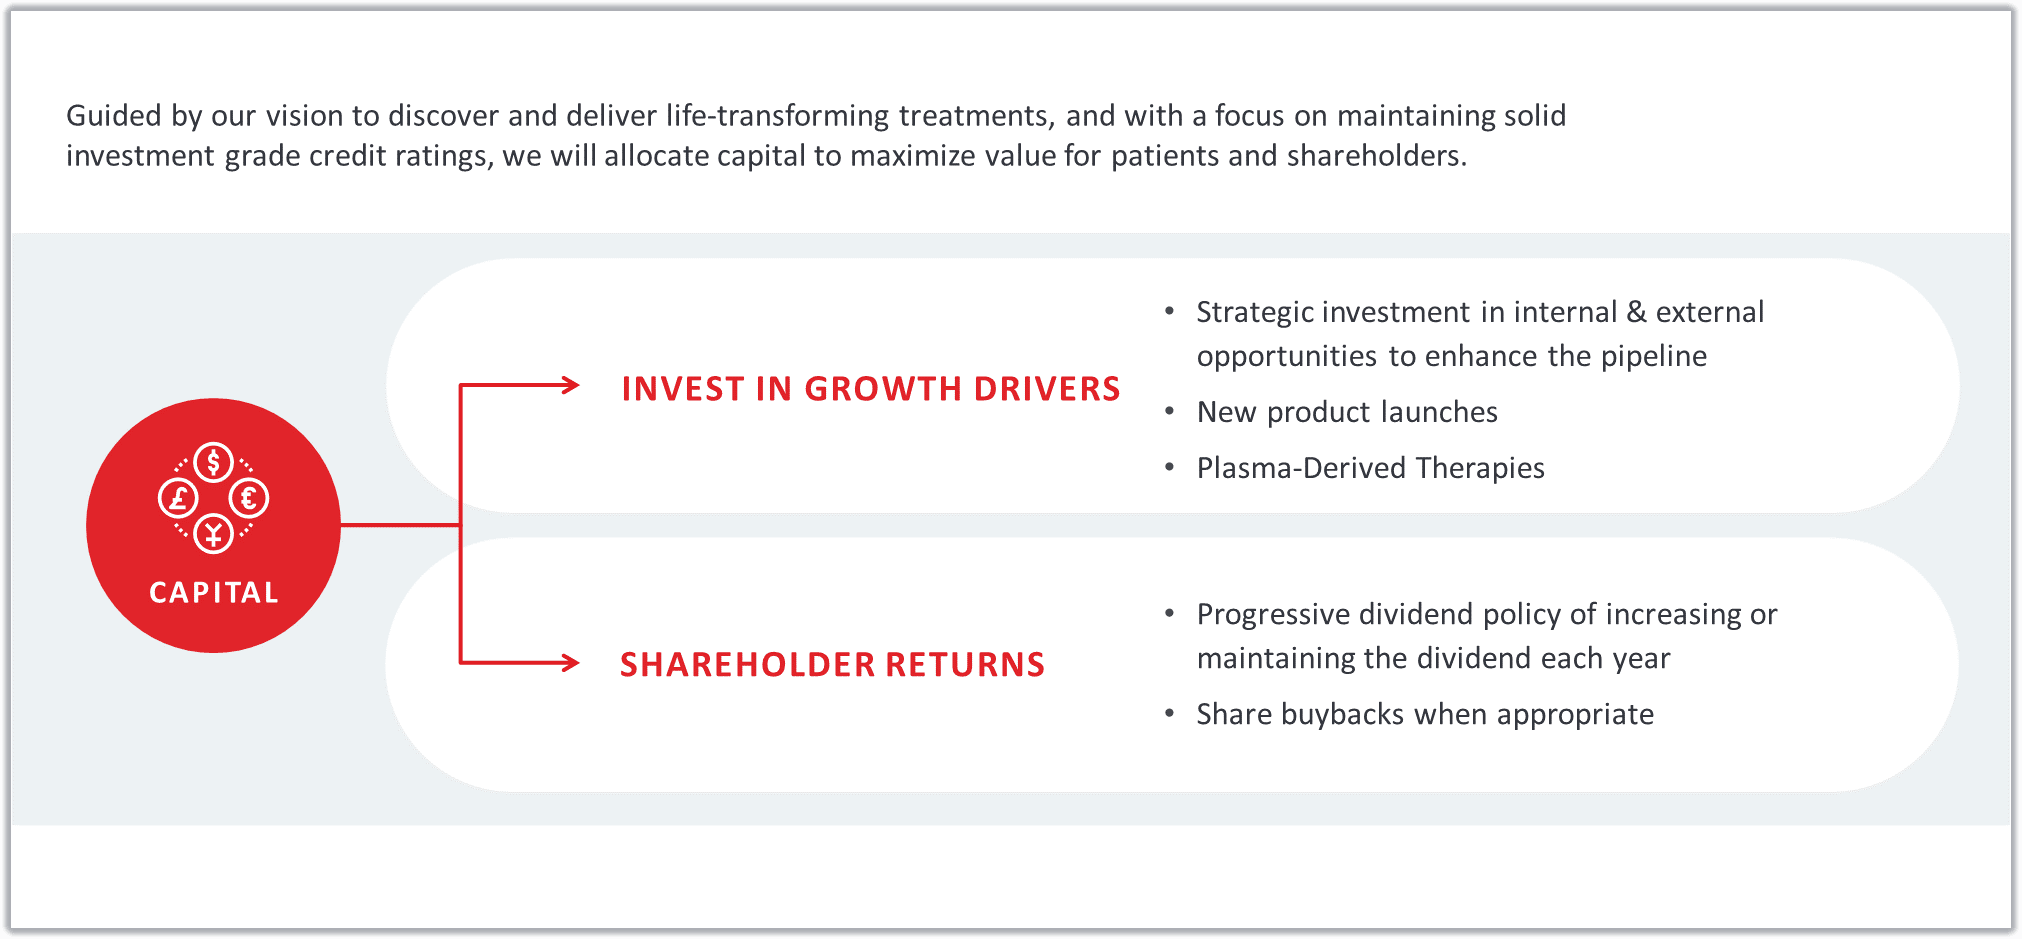 A diagram showing our capital allocation policy. Guided by our vision to discover and deliver life-transforming treatments, and with a focus on maintaining solid investment grade credit ratings, we will allocate capital to maximize value for patients and shareholders. Takeda's policy in the allocation of capital is as follows. Invest in growth drivers, which includes strategic investment in internal and external opportunities to enhance the pipeline, new product launches and Plasma-Derived Therapies. And shareholder returns, which includes our progressive dividend policy of increasing or maintaining the dividend each year and share buybacks when appropriate.